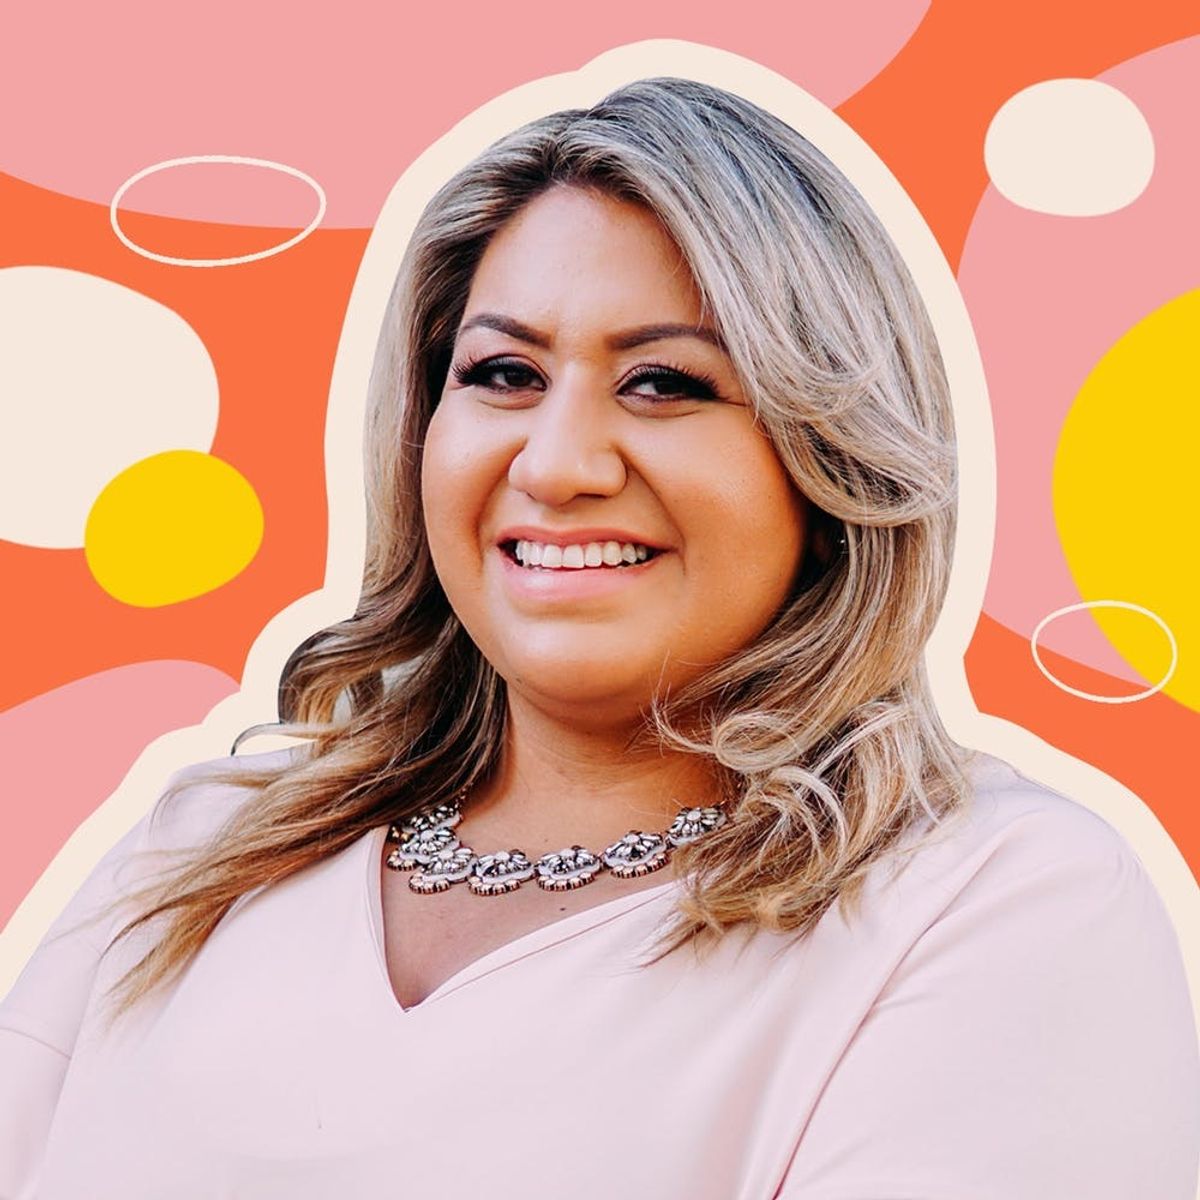 25-Year-Old Alma Hernandez Has a Message for Women: Don’t ‘Wait Your Turn’ to Run for Office